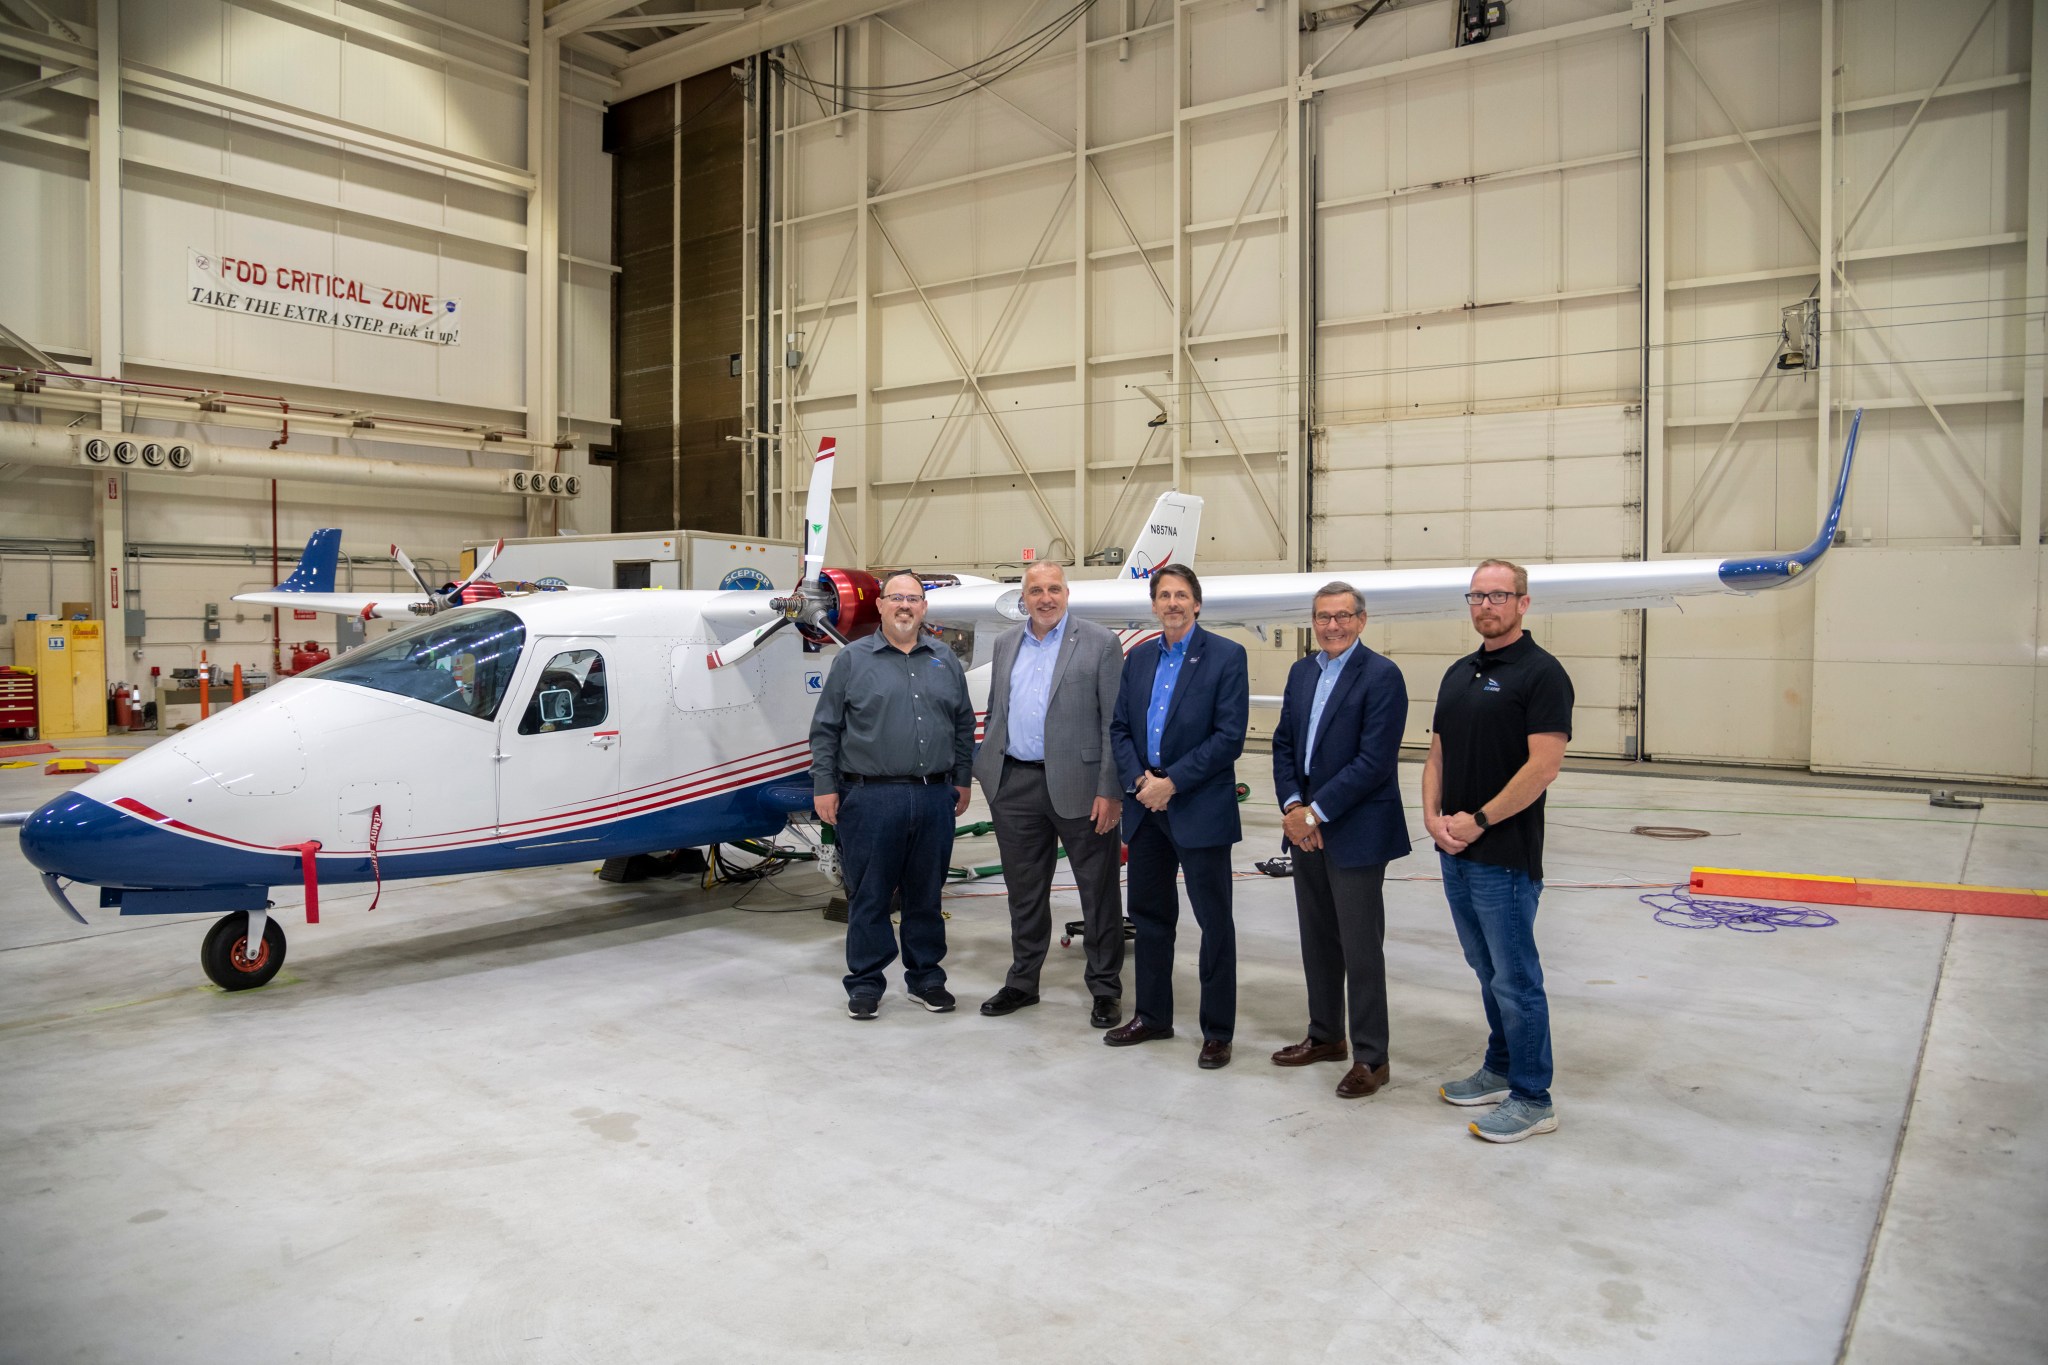 ARMD leadership meet with members of the X-57 project team and ESAero during a visit to the X-57 hanger at NASA Armstrong Flight Research Center.